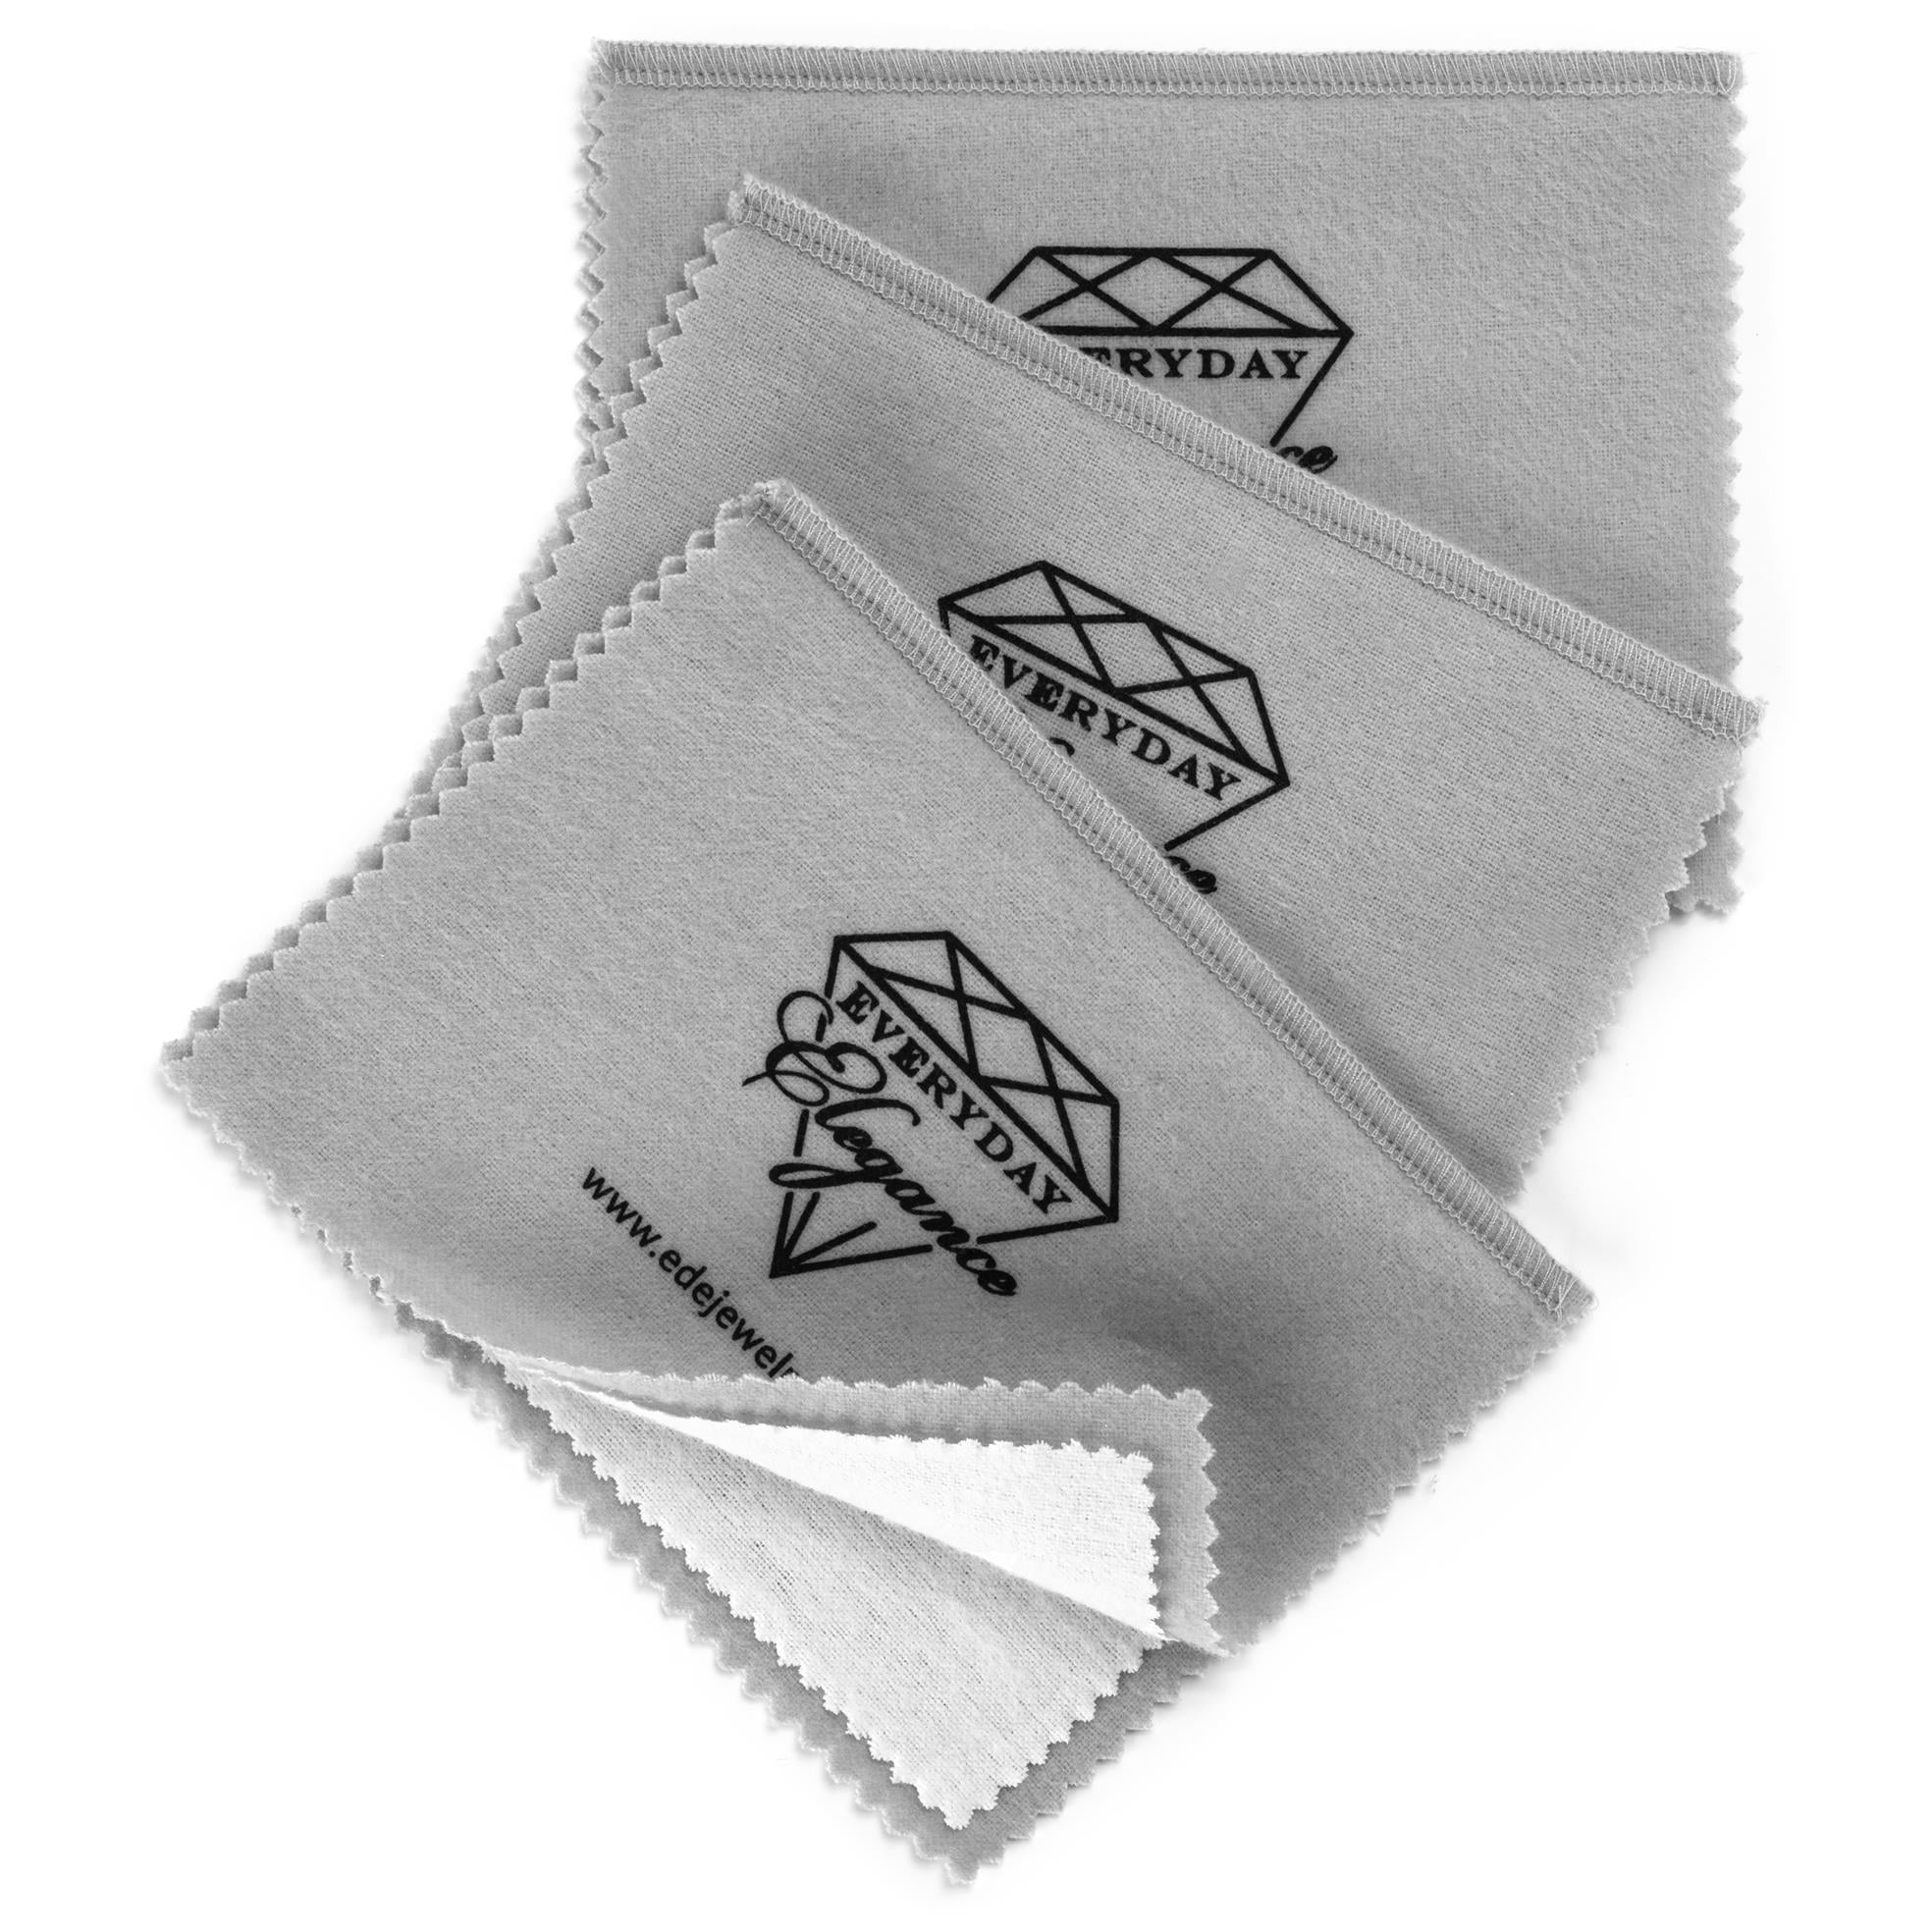 Silver Jewelry Cleaning Cloth Polishing Cloths Silver Cleaner Silver Polish Cloth Jewelry Cleaner Jewelry Cloths for Gold Silver Platinum Jewelry Coins Watches Silverware 